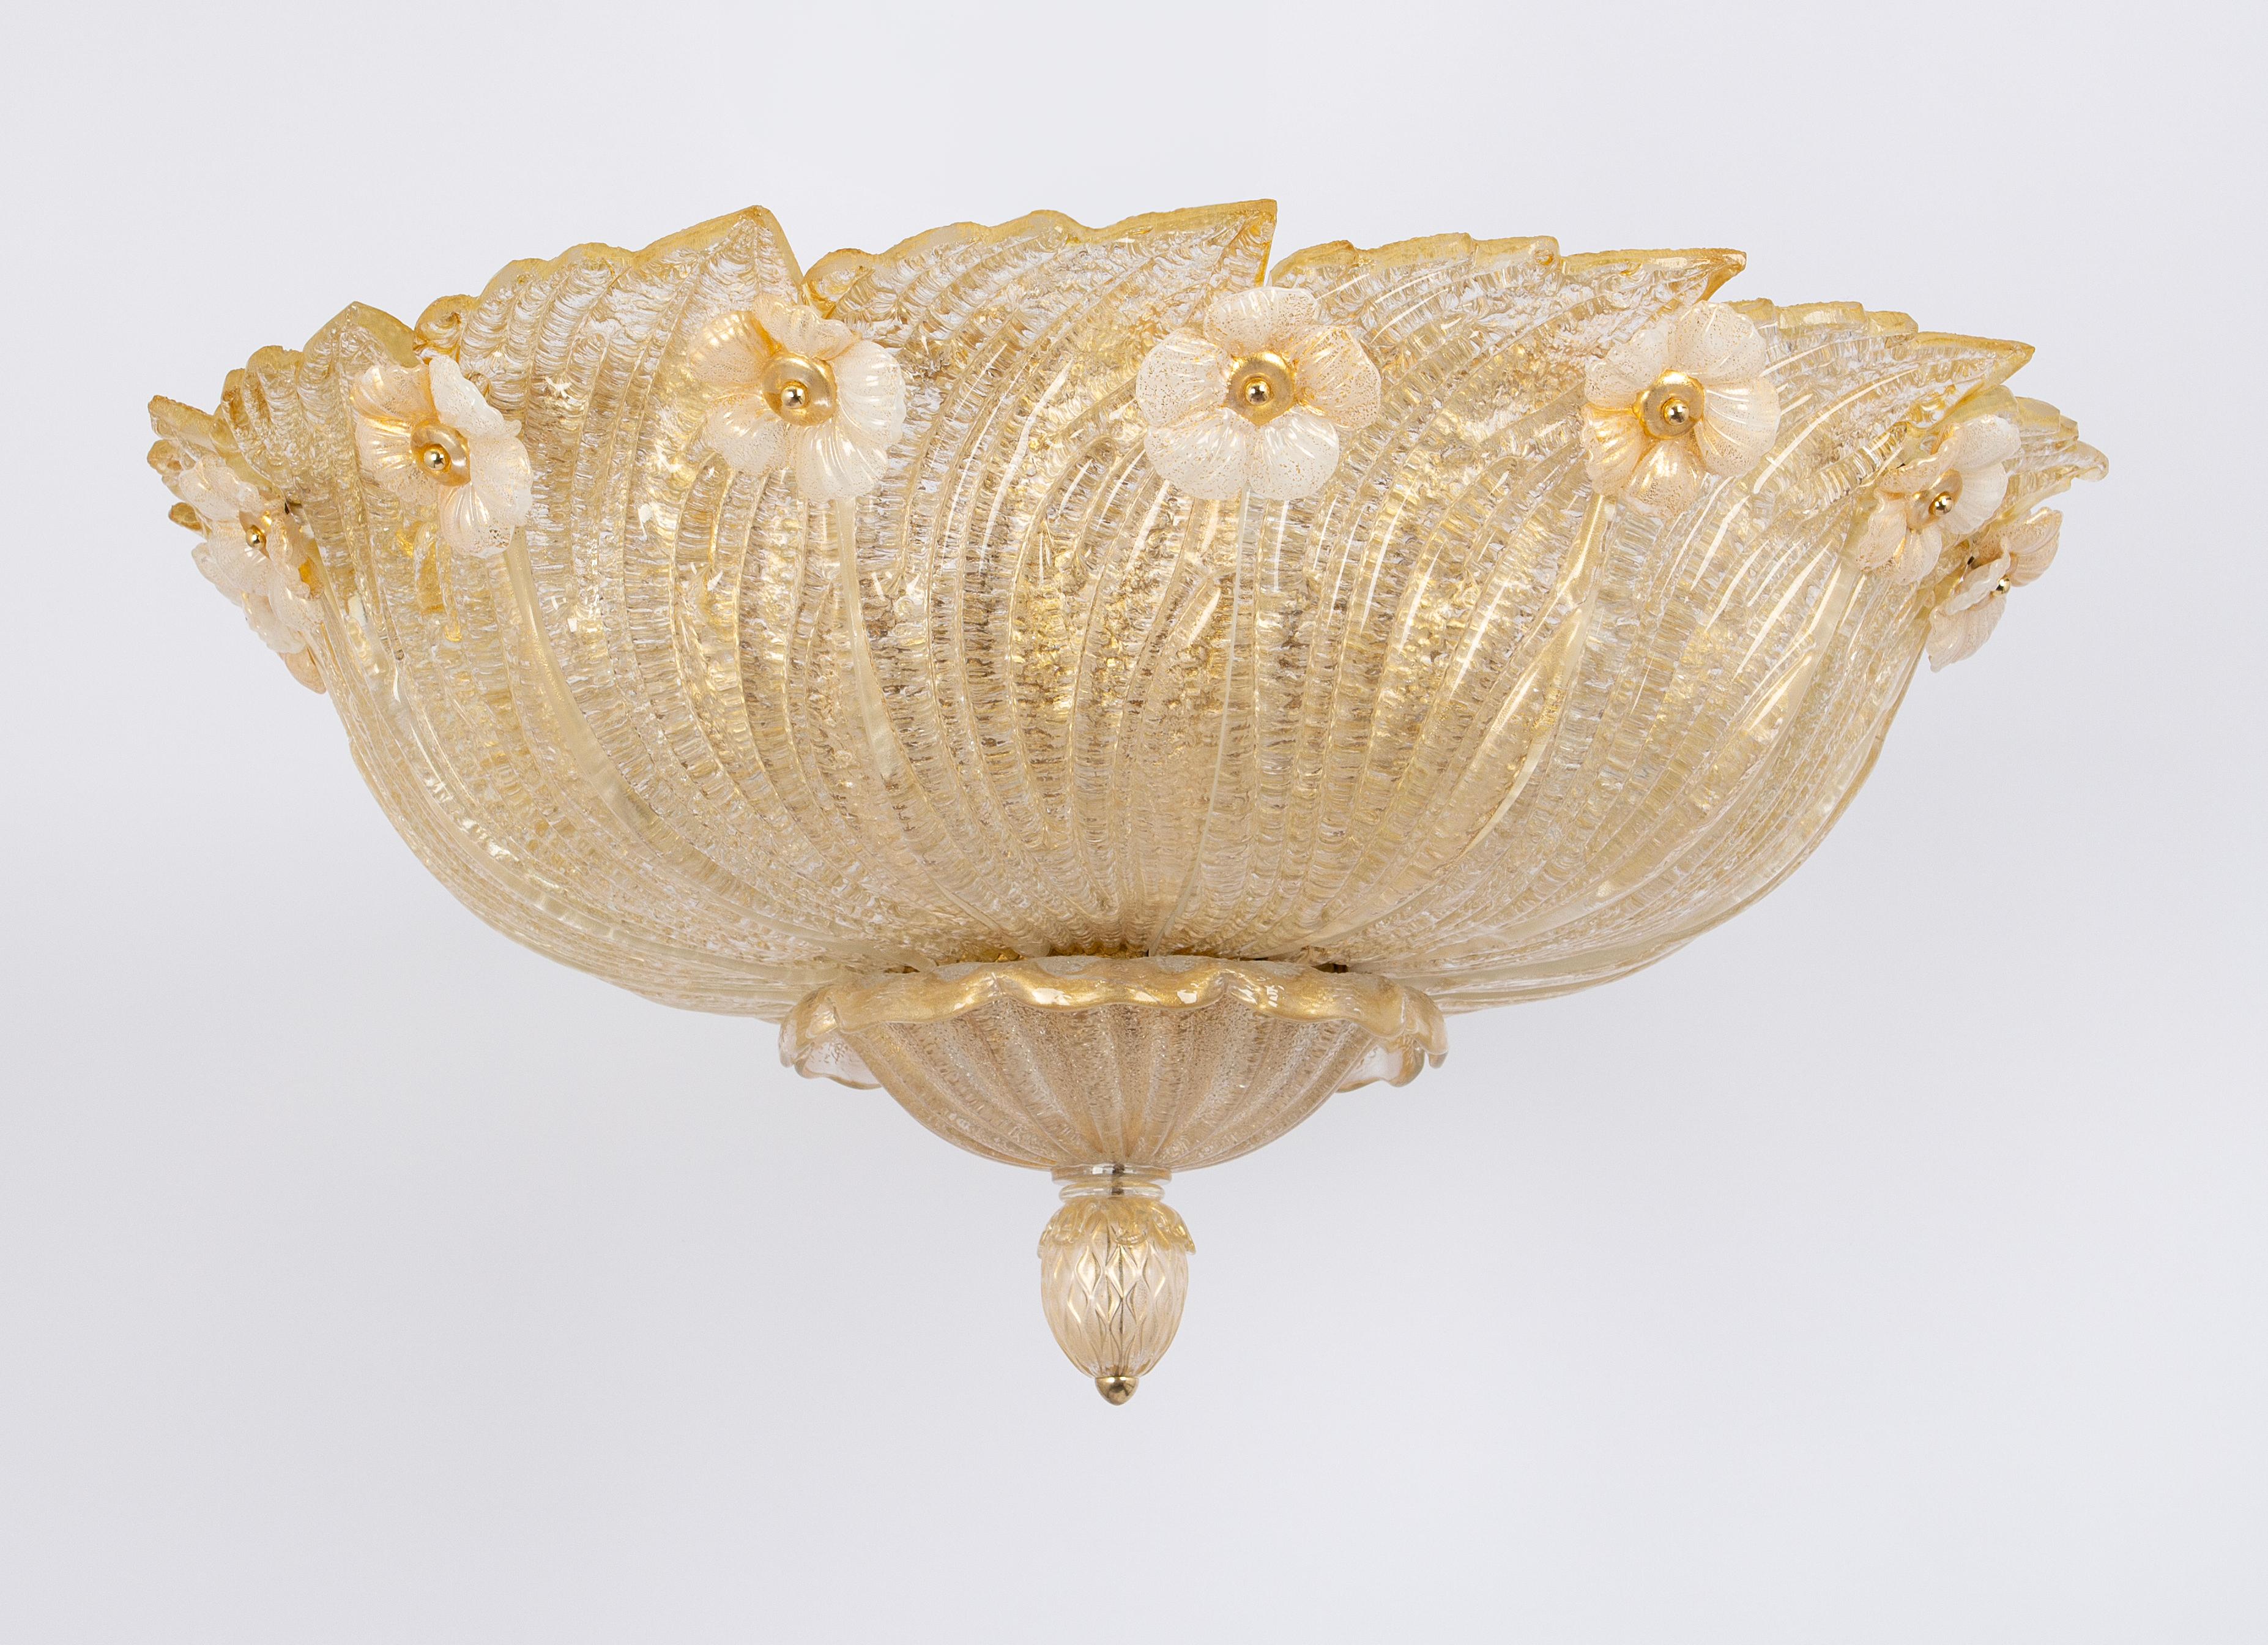 Murano Glass 1 of 2 Large Grand Hotel Murano Ceiling Fixture by Barovier & Toso, Italy, 1970s For Sale